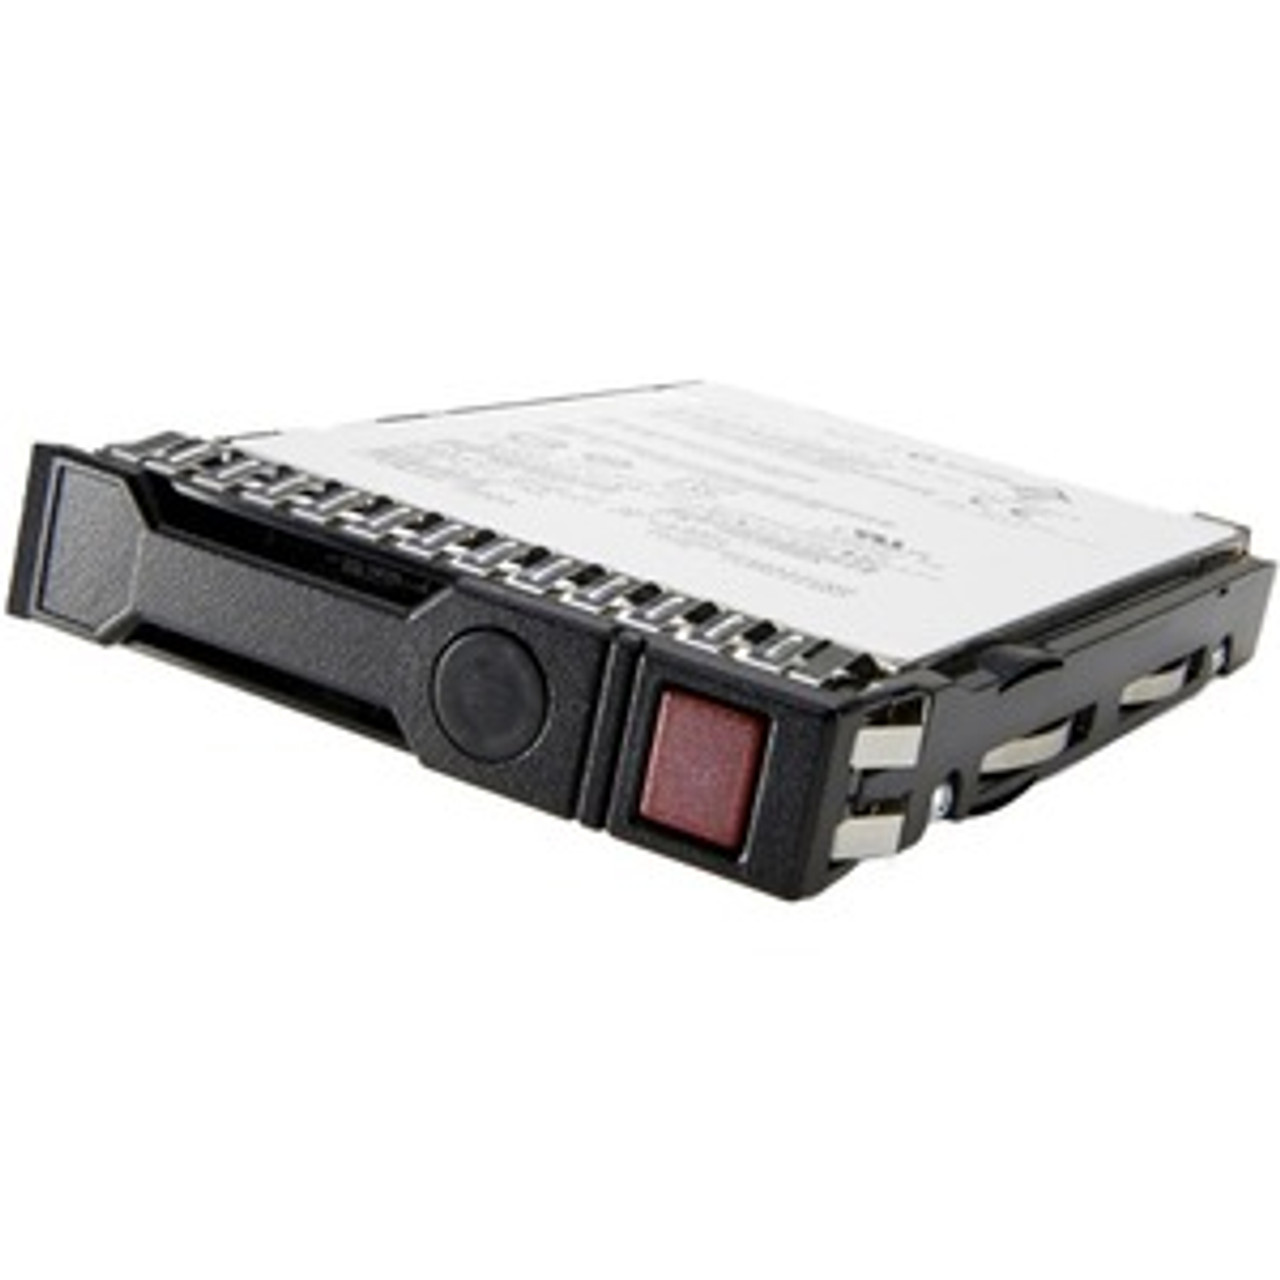 765464-H21 HPE 1TB 7200RPM SAS 12Gbps Midline 2.5-inch Internal Hard Drive with Smart Carrier